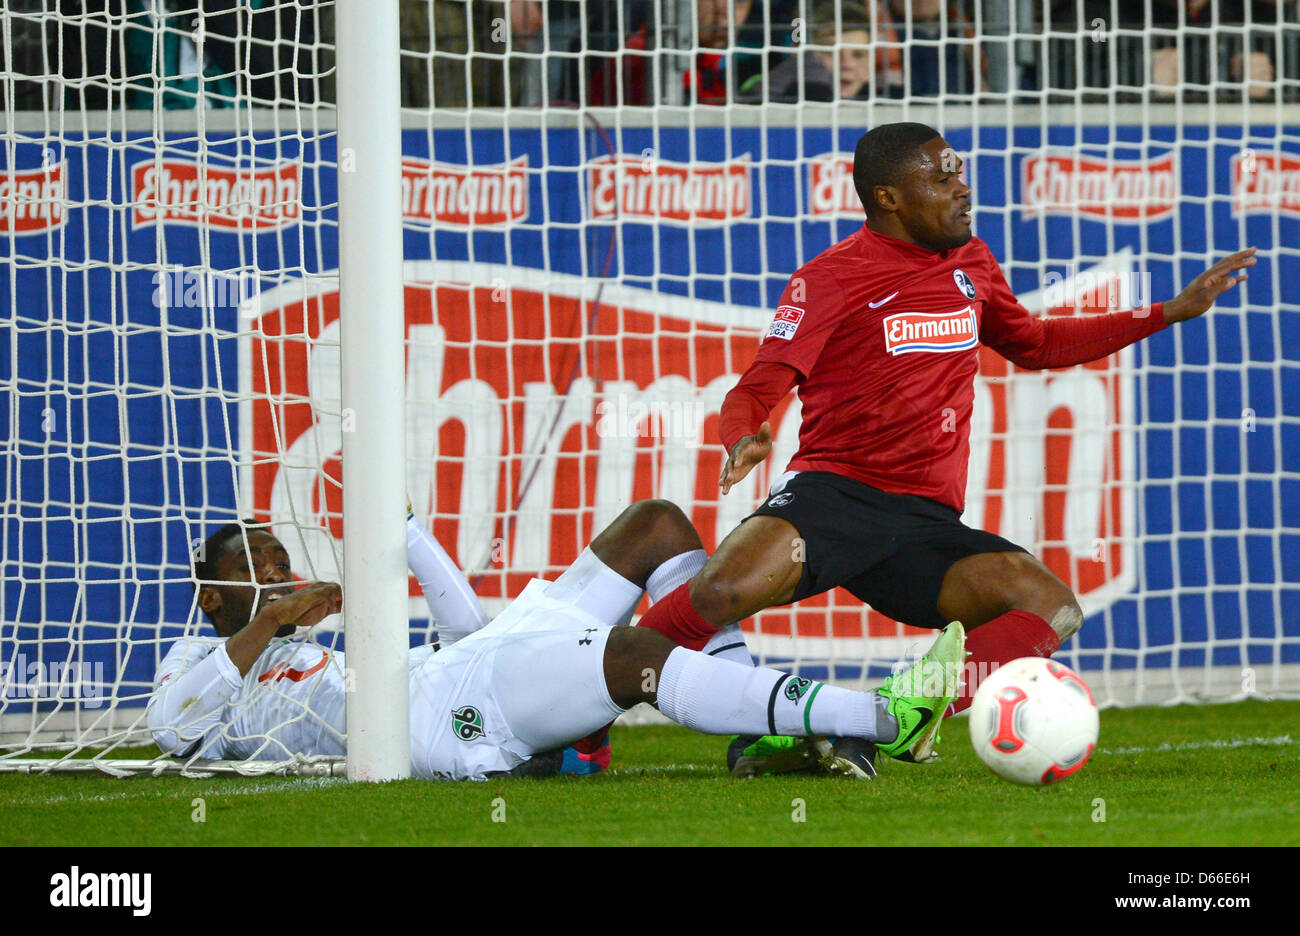 Freiburg's Cedrick Makiadi (R) and Hanover's Johan Djourou (L) fall down during the German Bundesliga soccer match between SC Freiburg and Hannover 96 at Mage Solar Stadium in Freiburg, Germany, 12 April 2013. Photo: Patrick Seeger Stock Photo